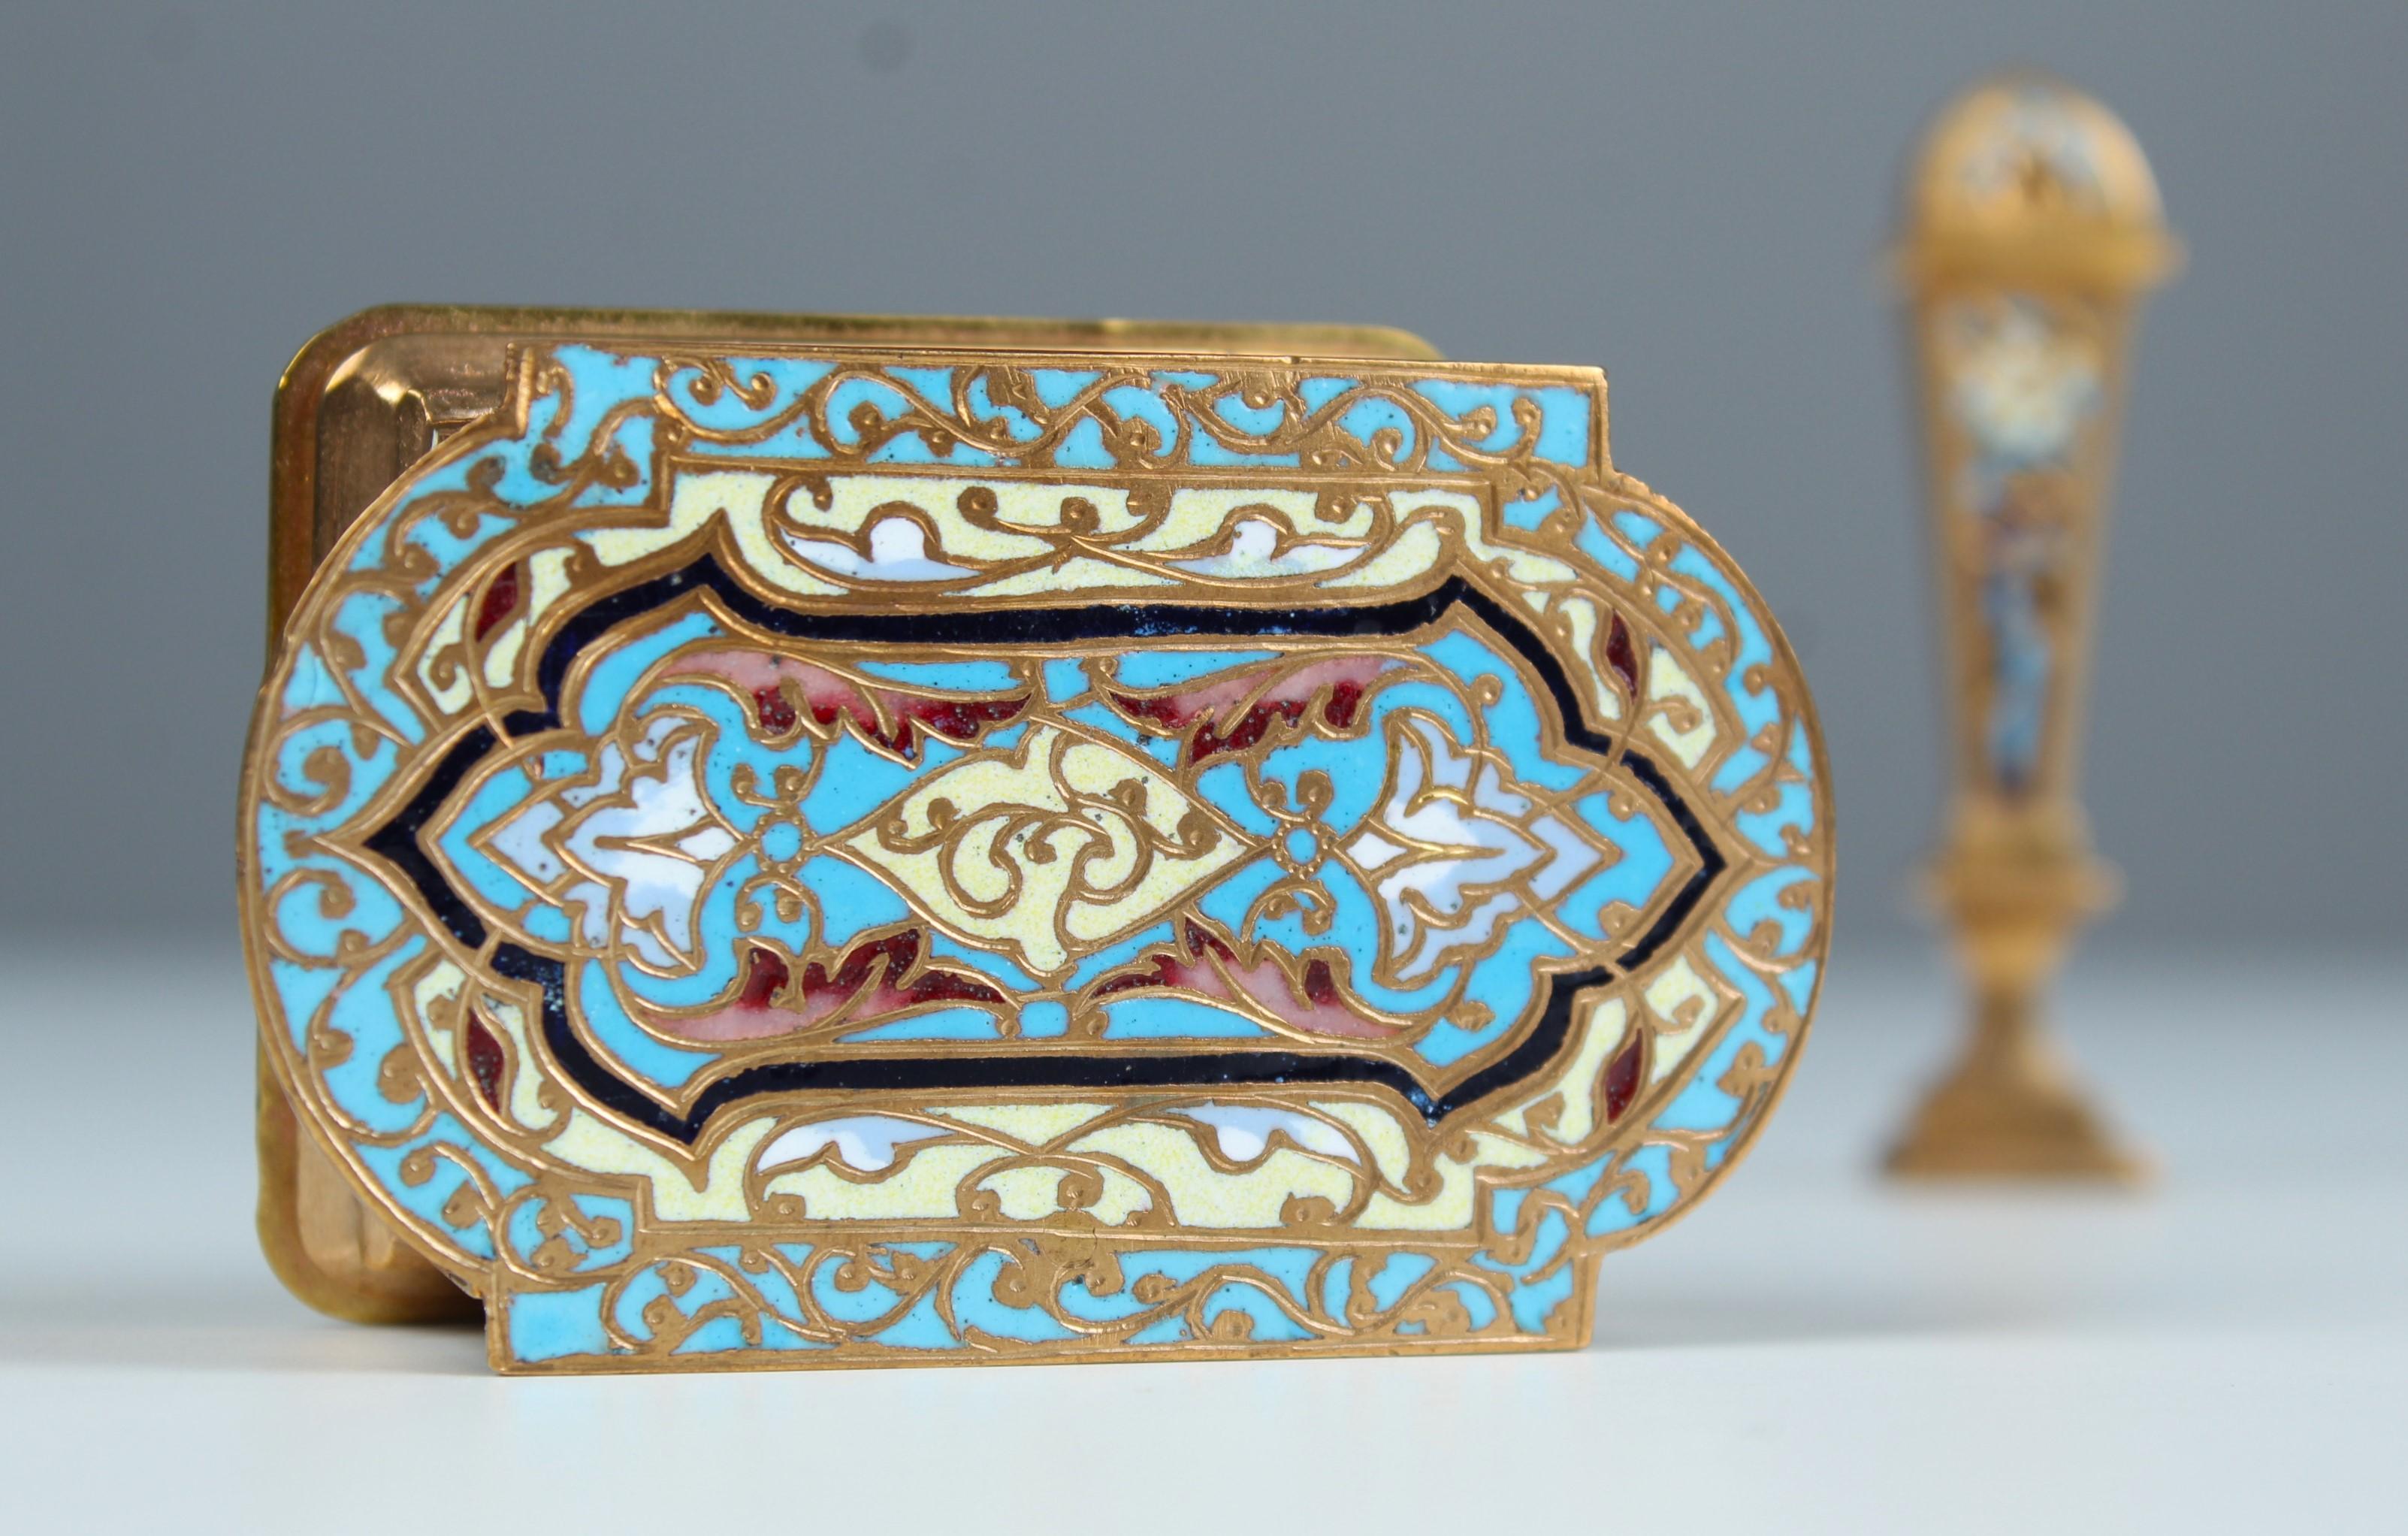 Exceptional Enameled Desk Set of a box and a seal stamp, France circa 1880.
Beautiful Cloisonné- enamel work in bold blue, turquoise, red and beige colours.

Measures:
Stamp- or matches-box: 6 x 5 x 4 cm 
Seal Stamp: 8 x 2 cm






